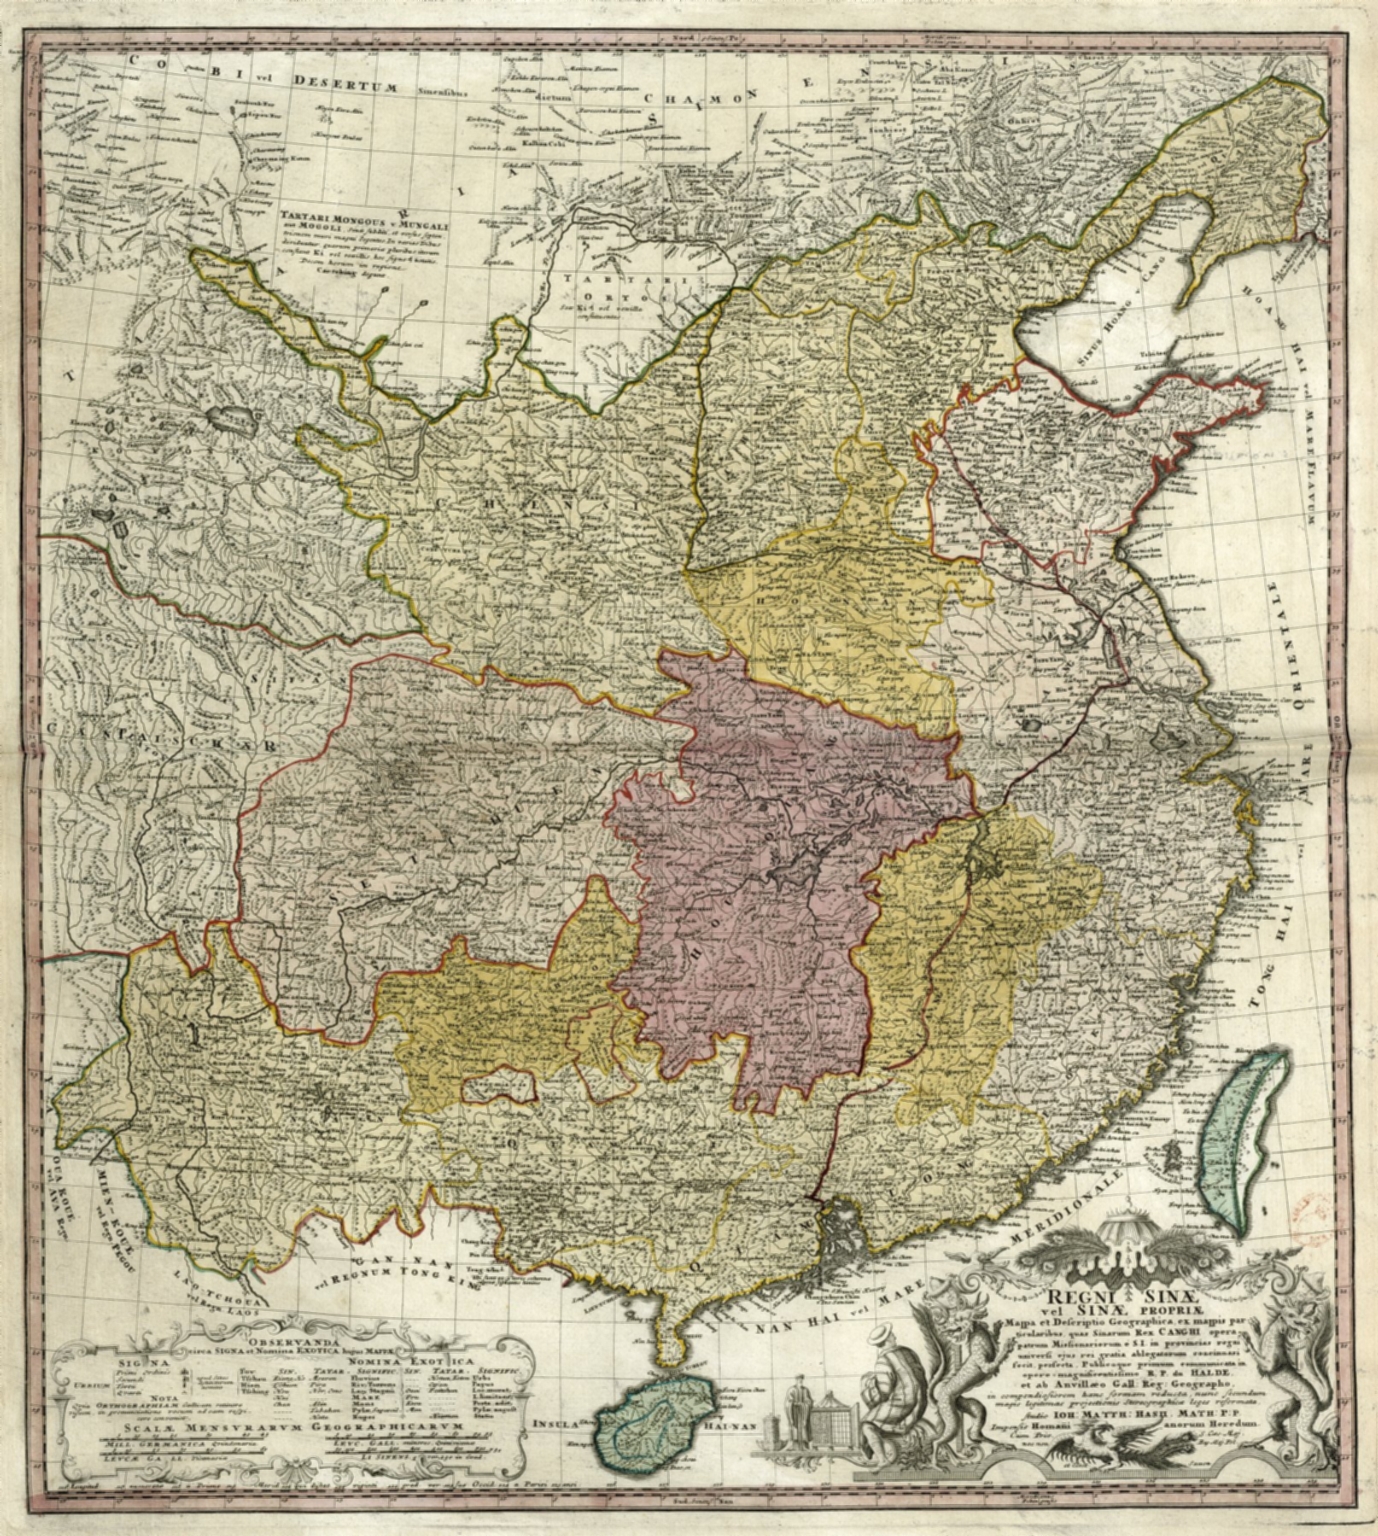 Map of China, and a description of the work of missionaries in China